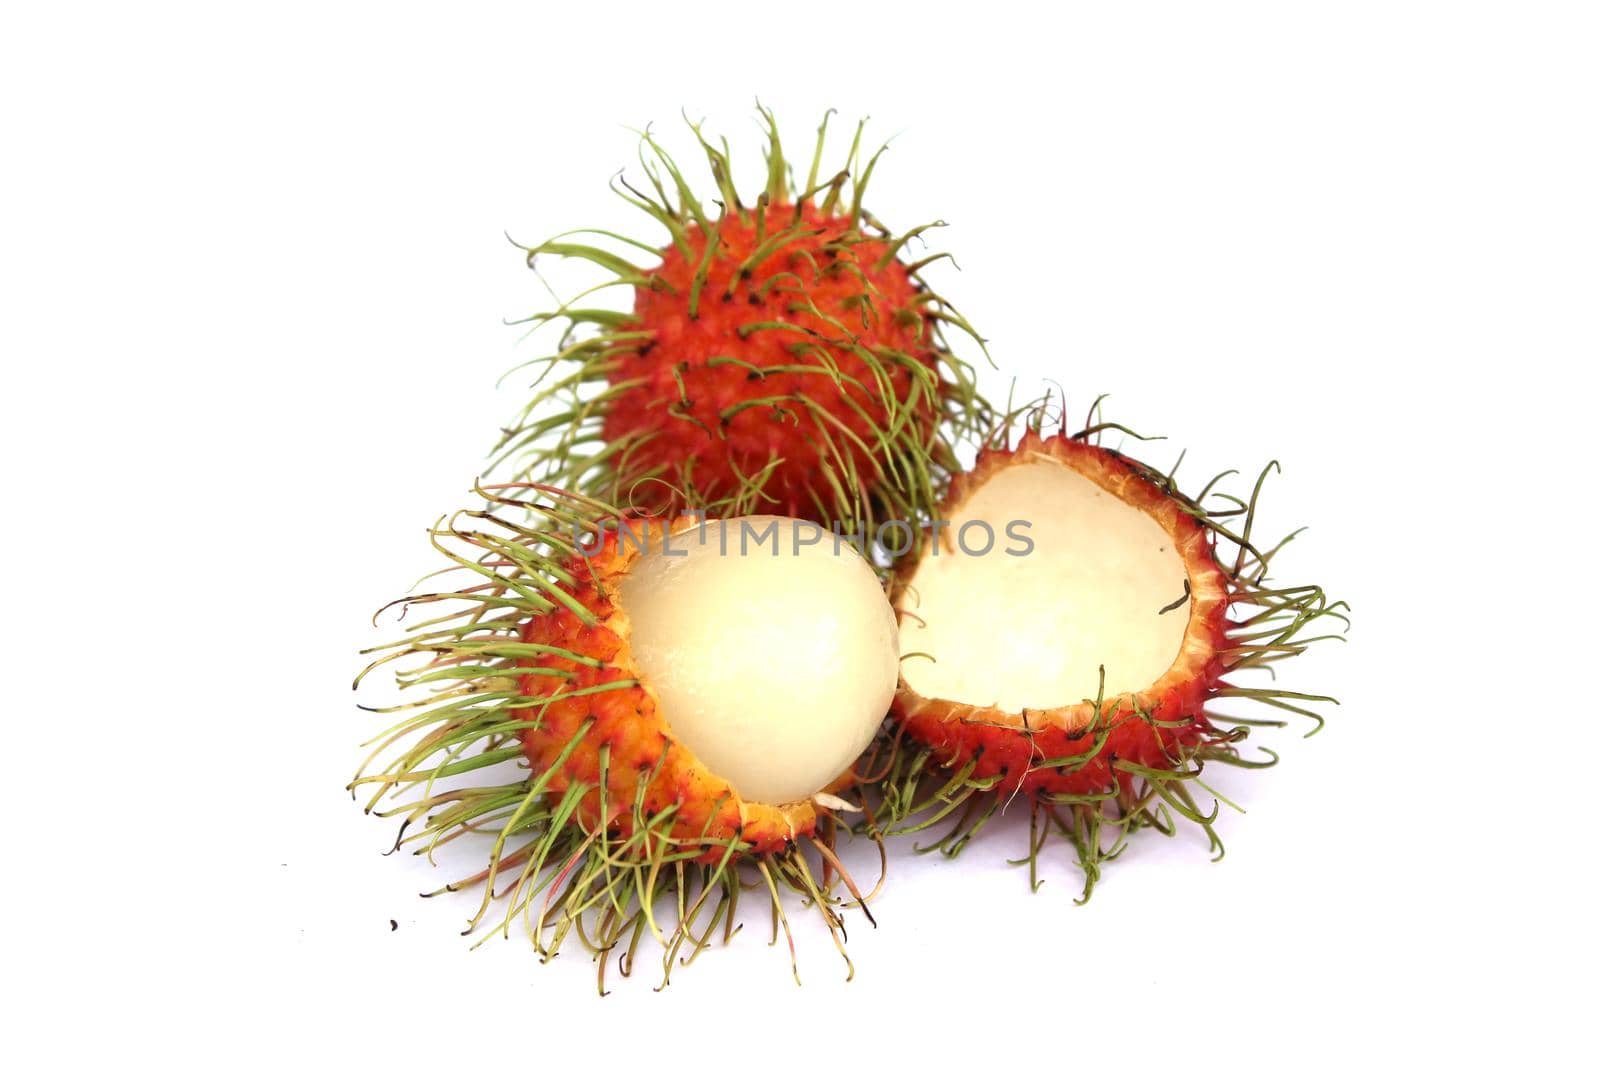 Sweet rambutan, the popular fruit of Thailand Peel off the bark to reveal the inside. isolated from a white background